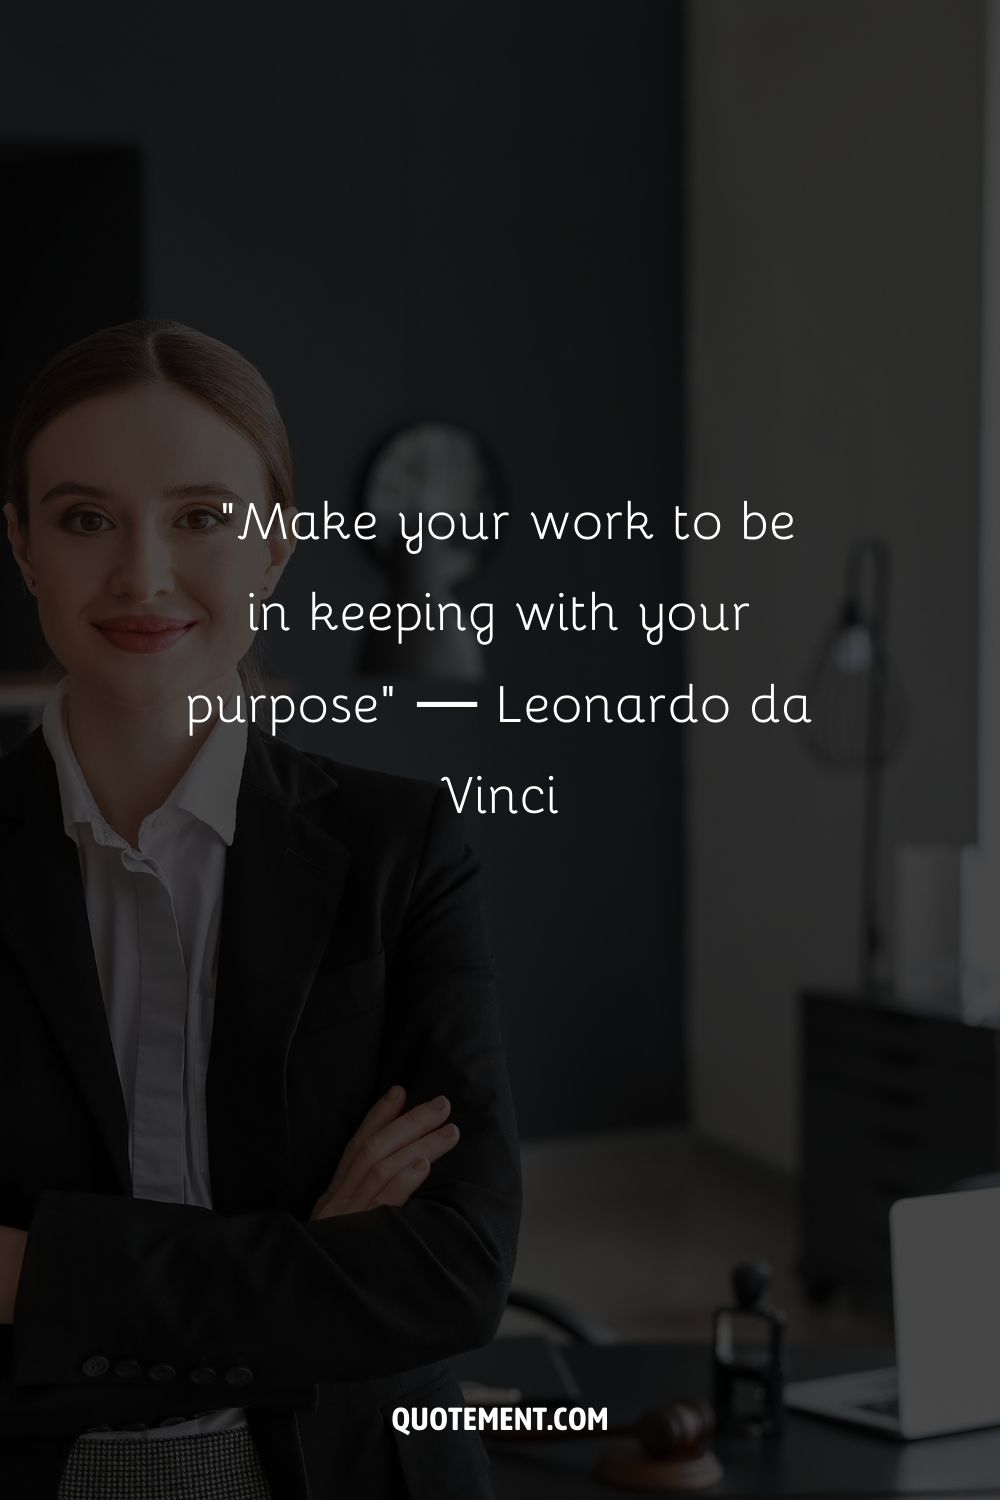 “Make your work to be in keeping with your purpose” ― Leonardo da Vinci